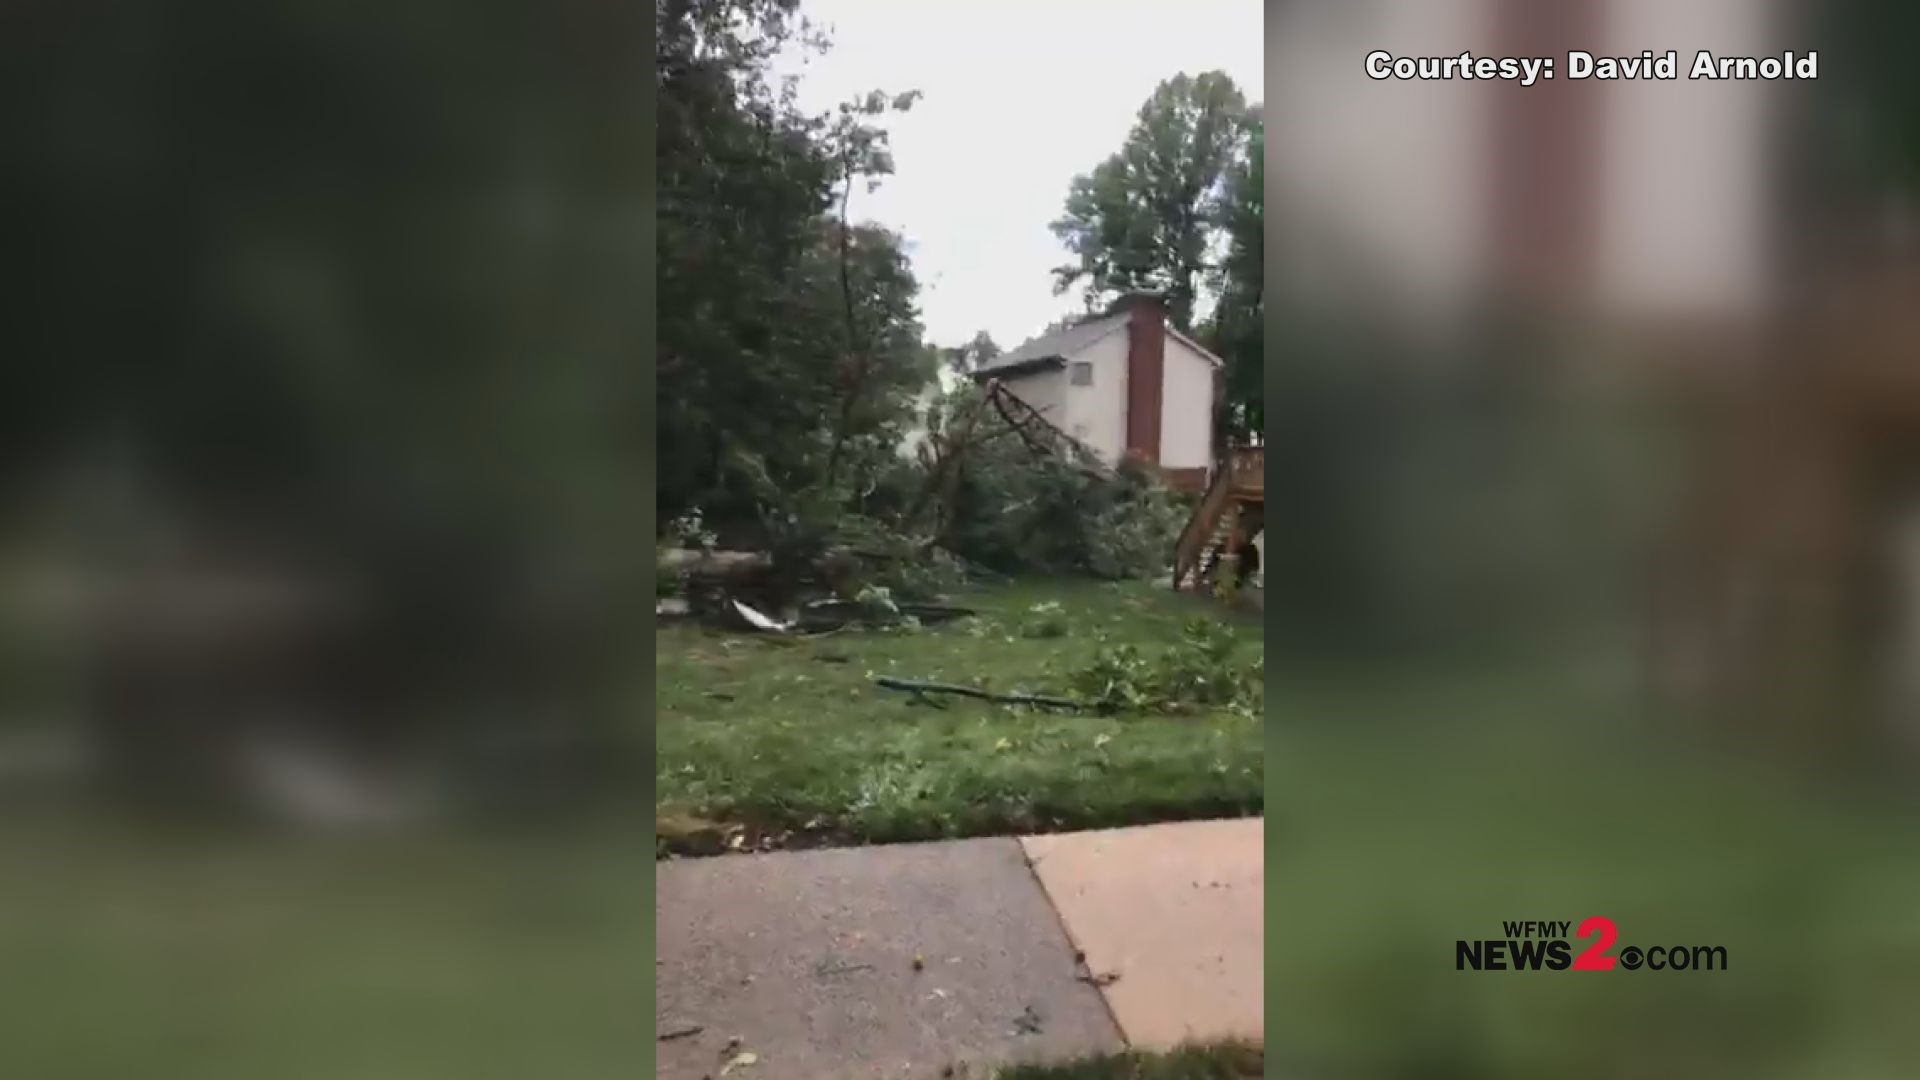 Strong storms impacted Kernersville Wednesday causing downed trees.